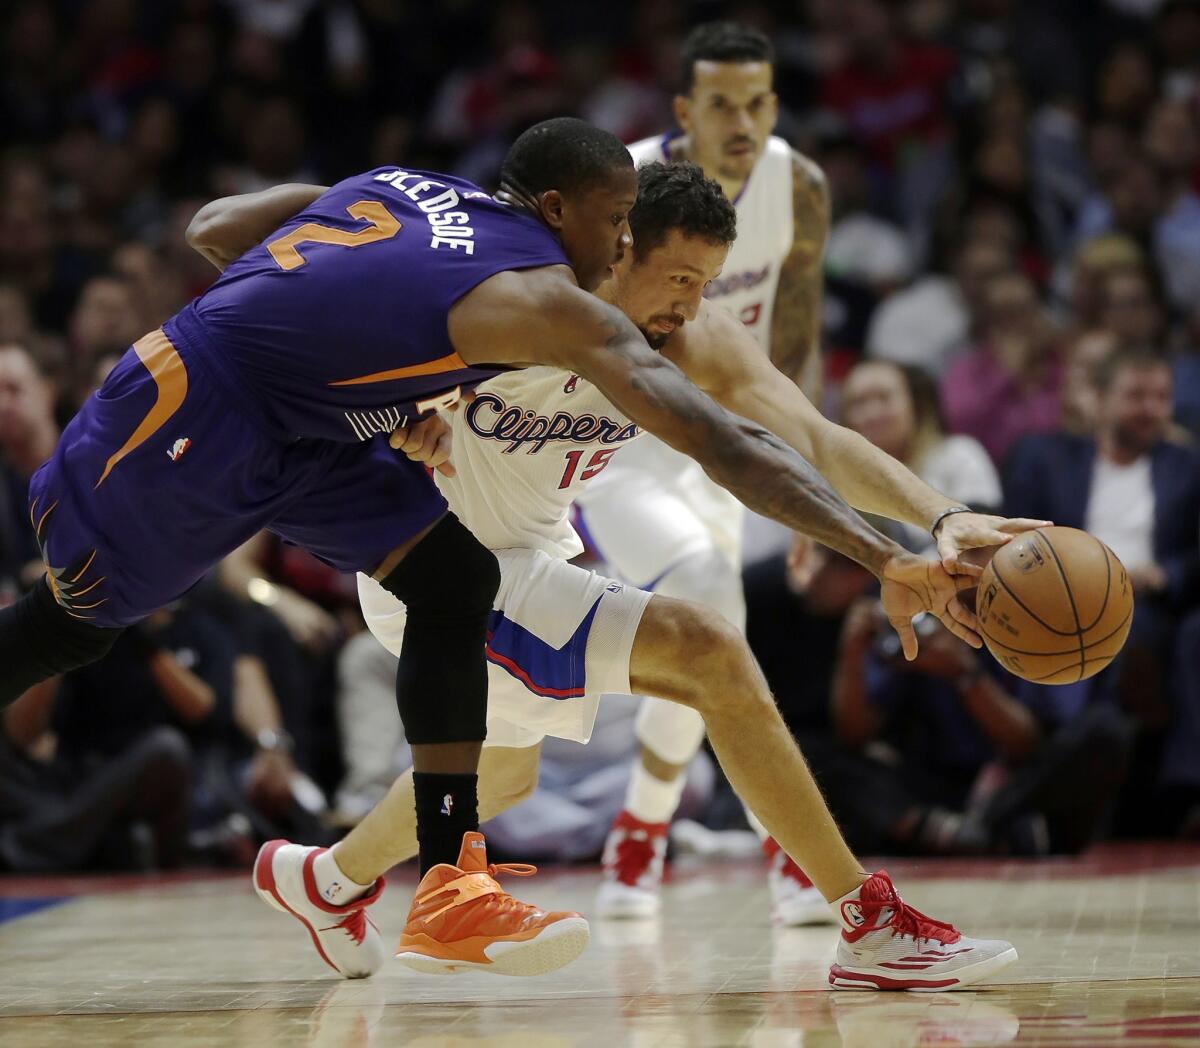 Clippers forward Hedo Turkoglu battles with Suns guard Eric Bledsoe for a loose ball during a preseason game on Wednesday at Staples Center.